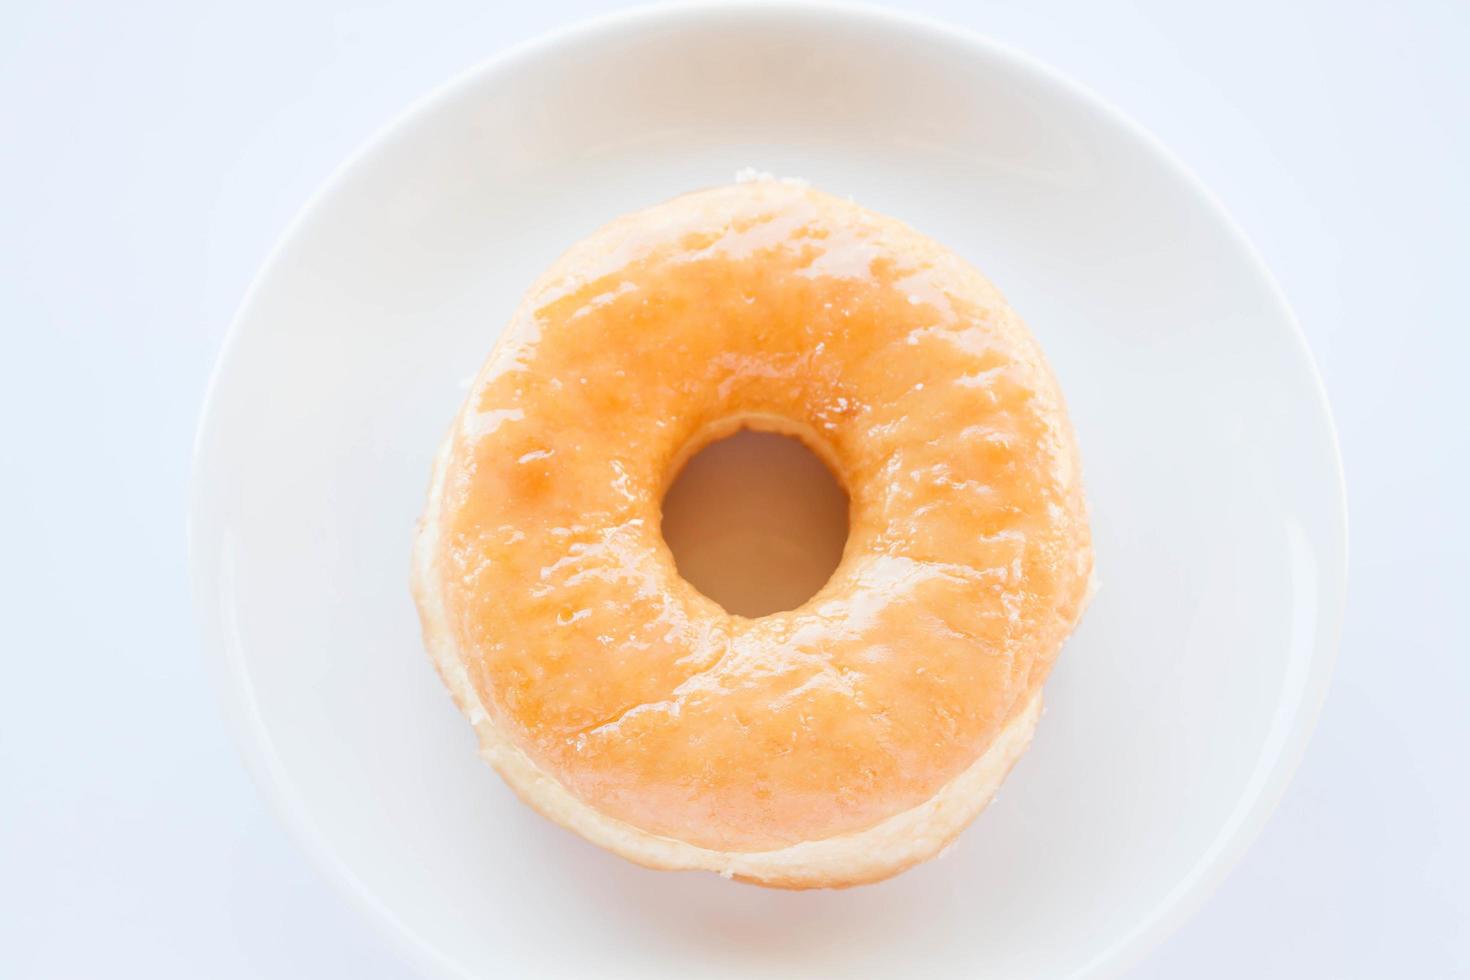 Top view of a donut photo